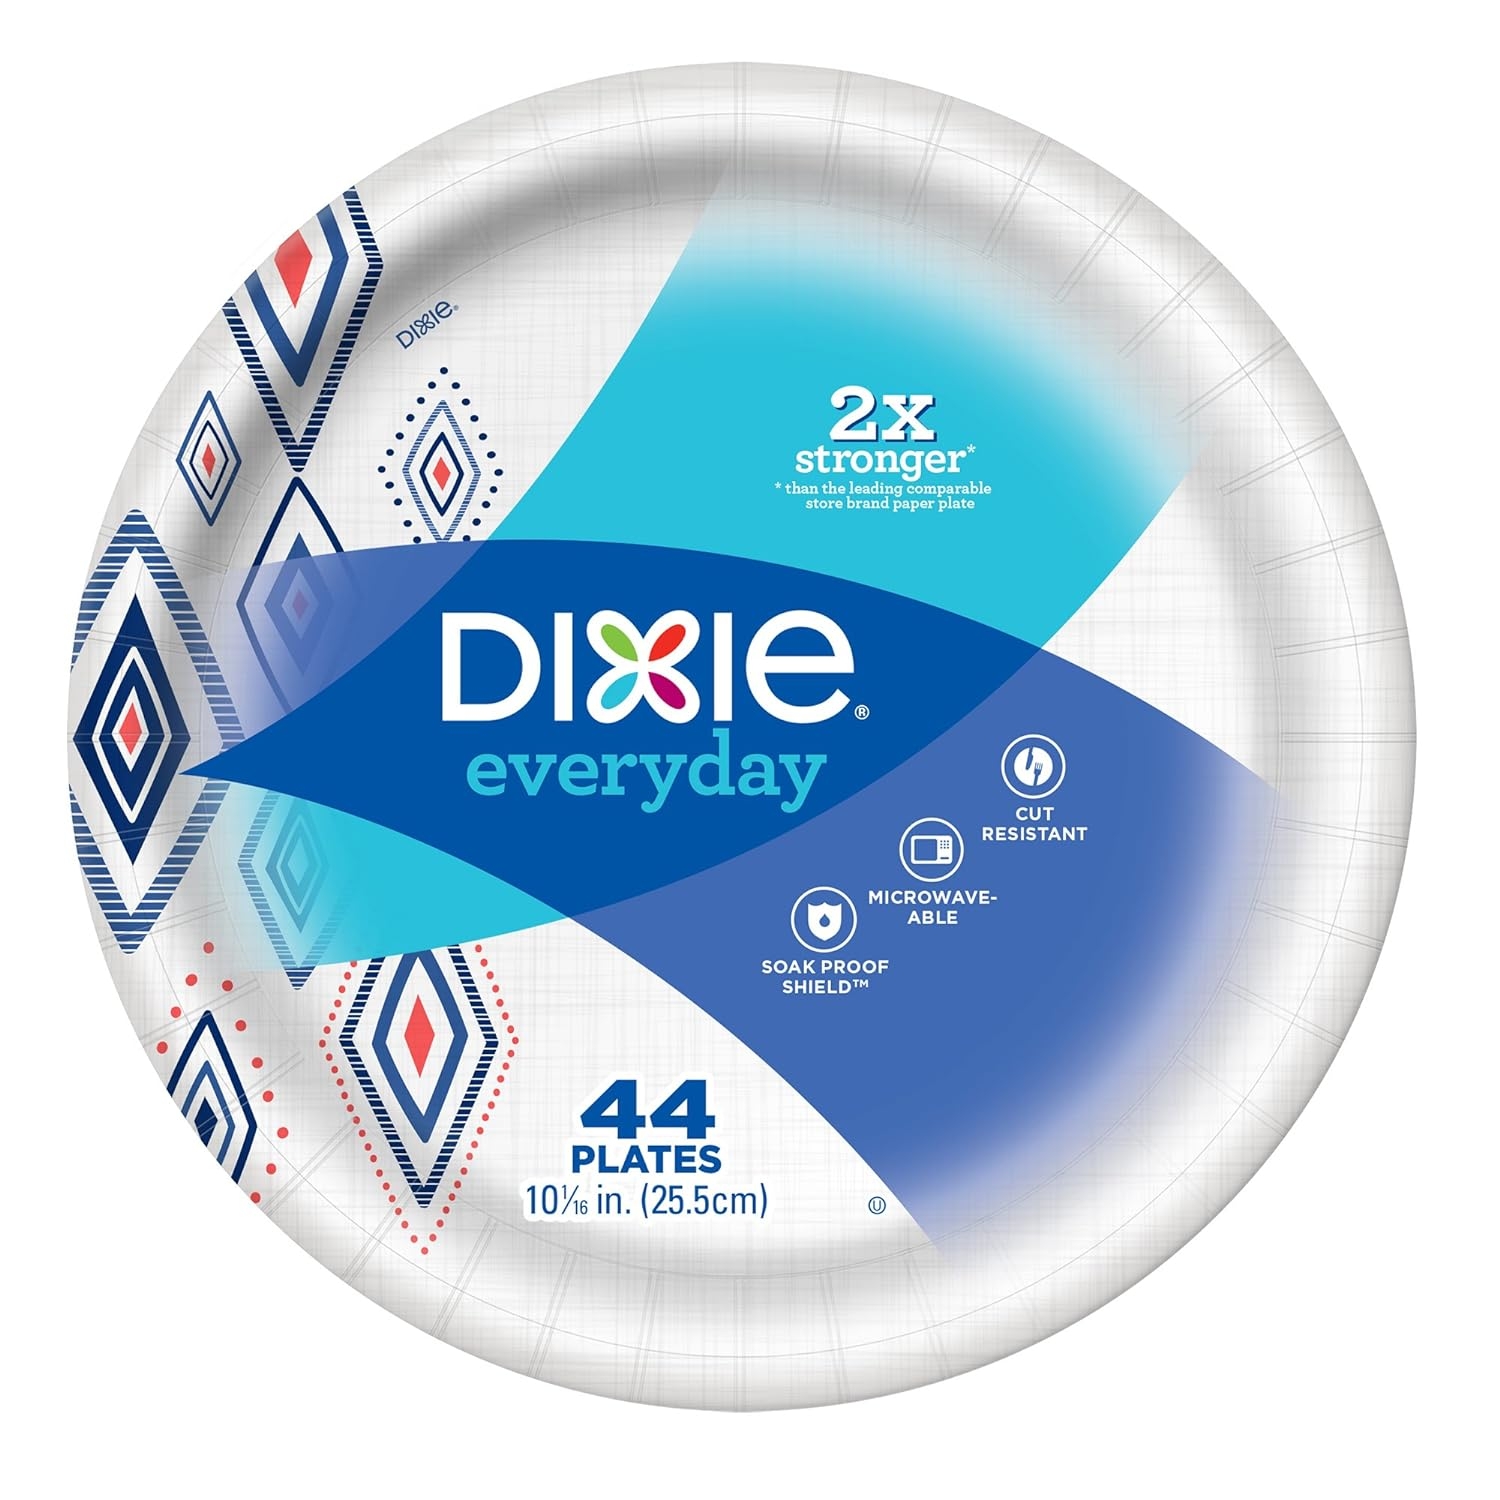 Dixie Everyday Paper Plates,10 1/16" Plate, 220 Count,  Exclusive Design, 5 Packs of 44 Plates, Dinner Size Printed Disposable Plates